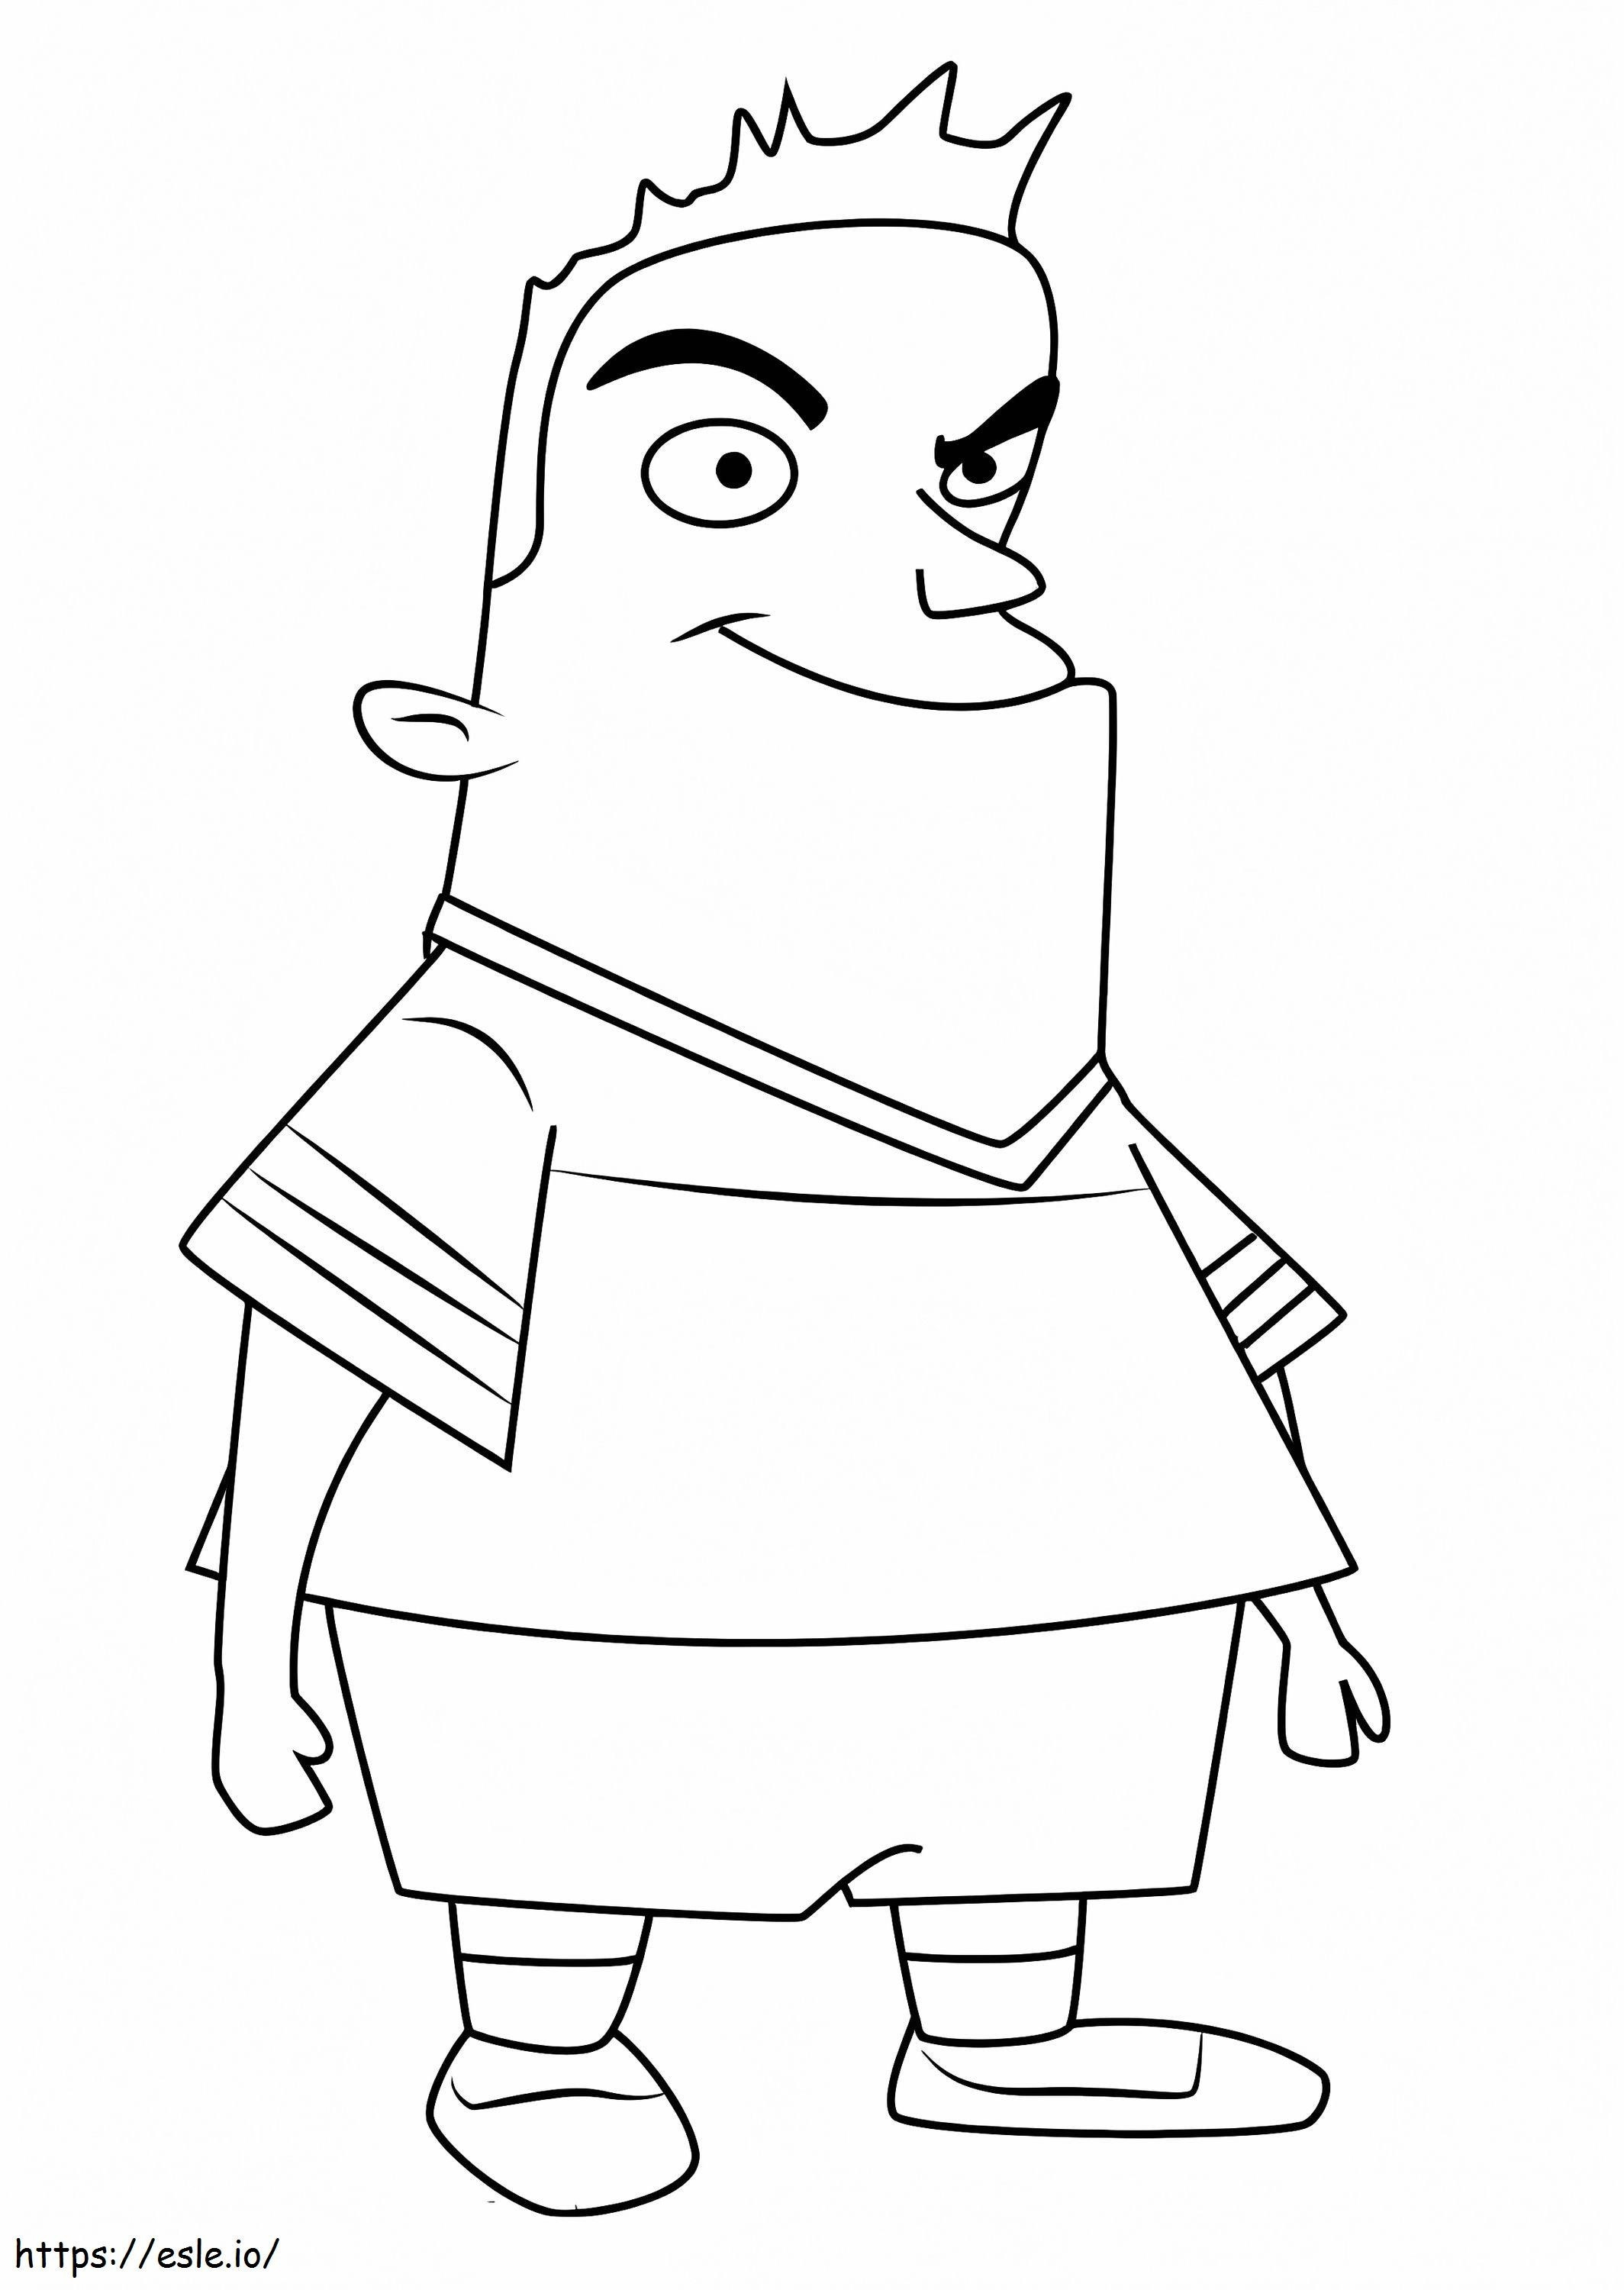 Kyle From Squirrel Boy coloring page